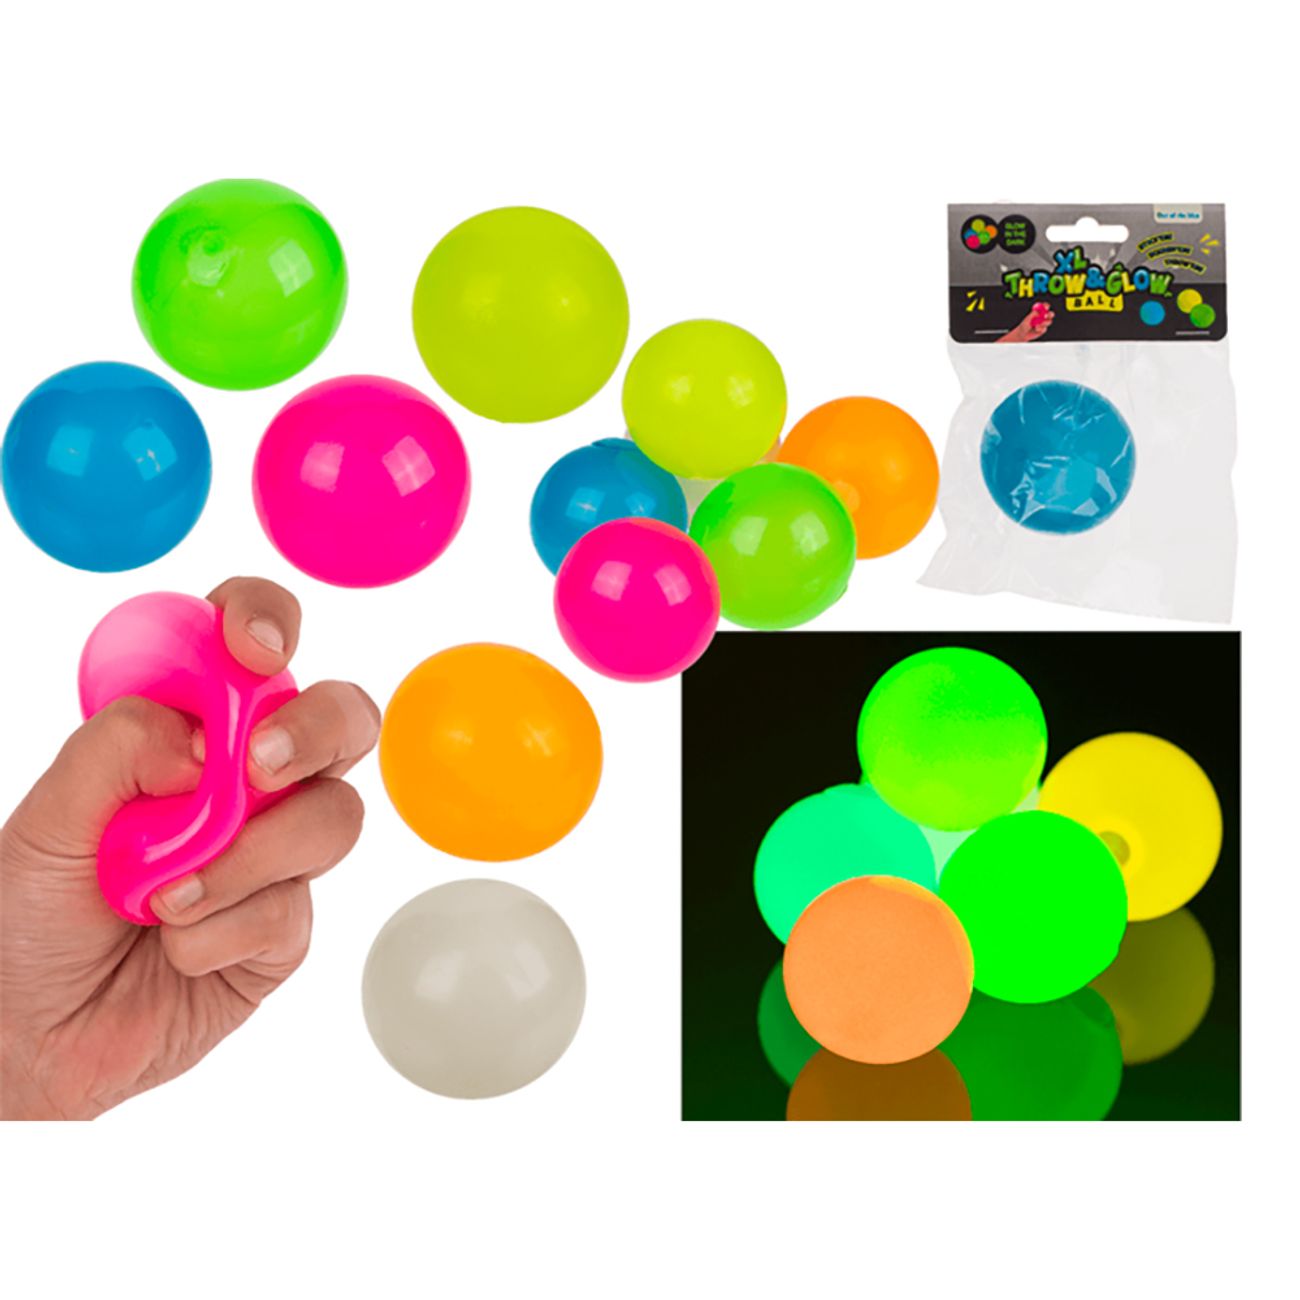 squeeze-ball-glow-in-the-dark-83925-2